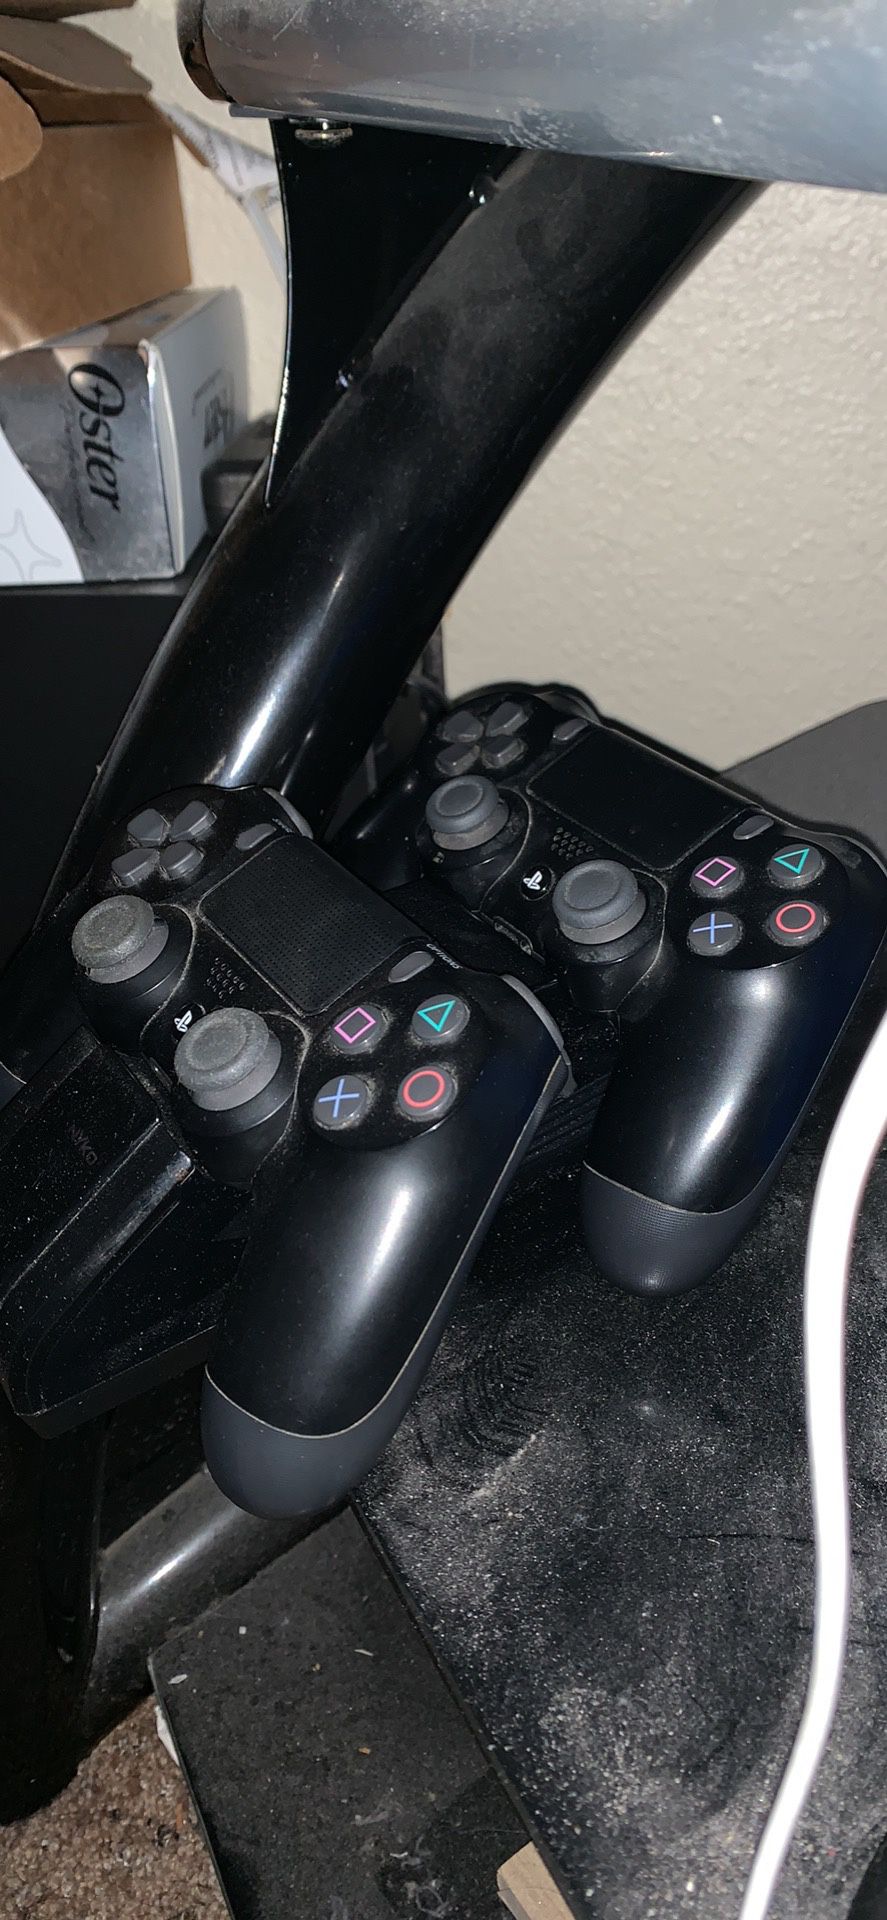 PS4 controller charging dock with controllers